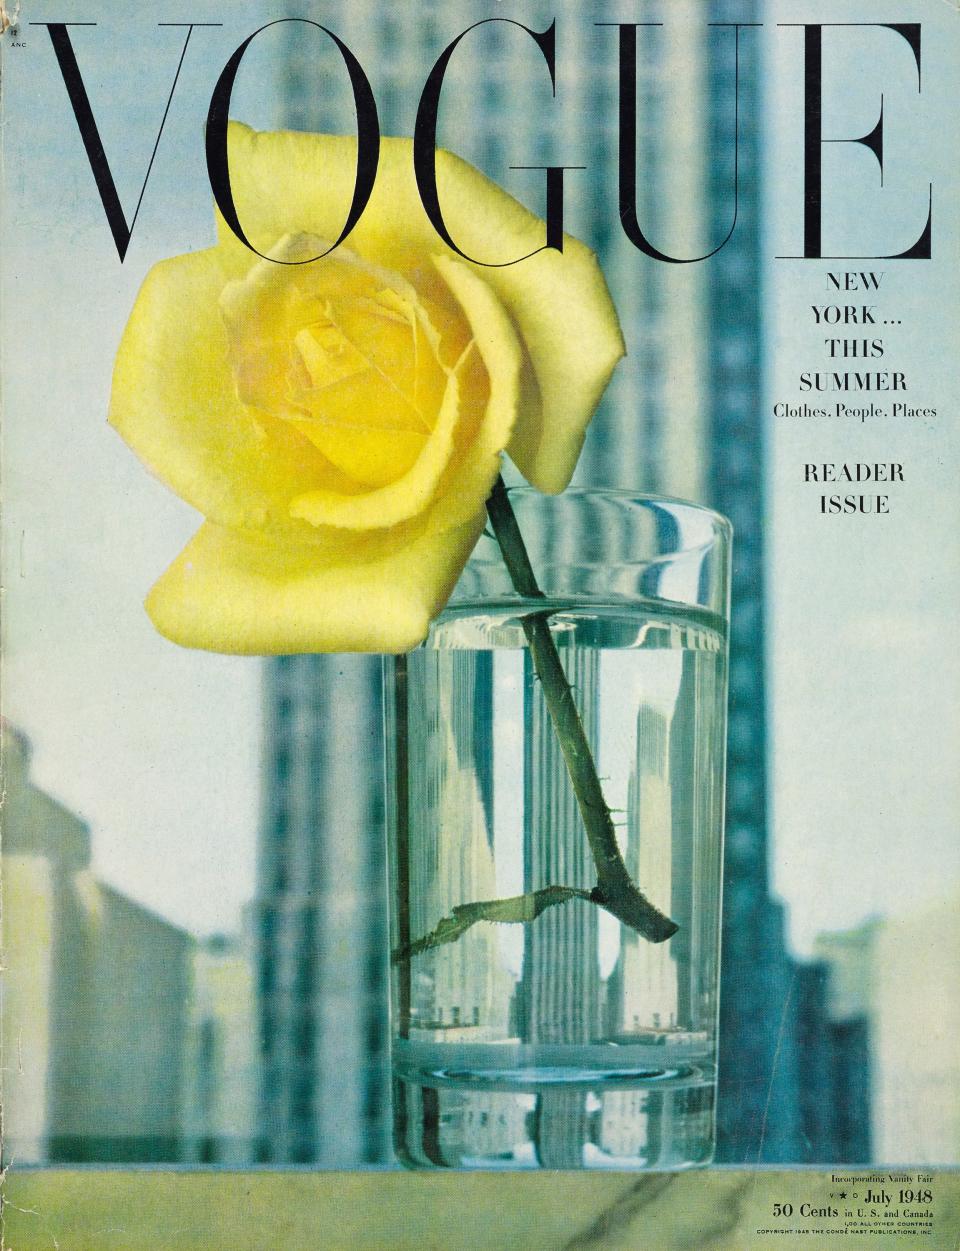 Seen through a glass clearly: the man-made miracle of the Rockefeller Center towers; against them the natural miracle of a slowly opening rose. The recurring subject “a view through a window,” which every painter, at some point, puts down on canvas, is here set down delicately, imaginatively, by Vogue’s artist-photographer Irving Penn. The windowsill is on Saks Fifth Avenue’s sixth floor. “Golden Rapture,” the rose, is from Totty’s.